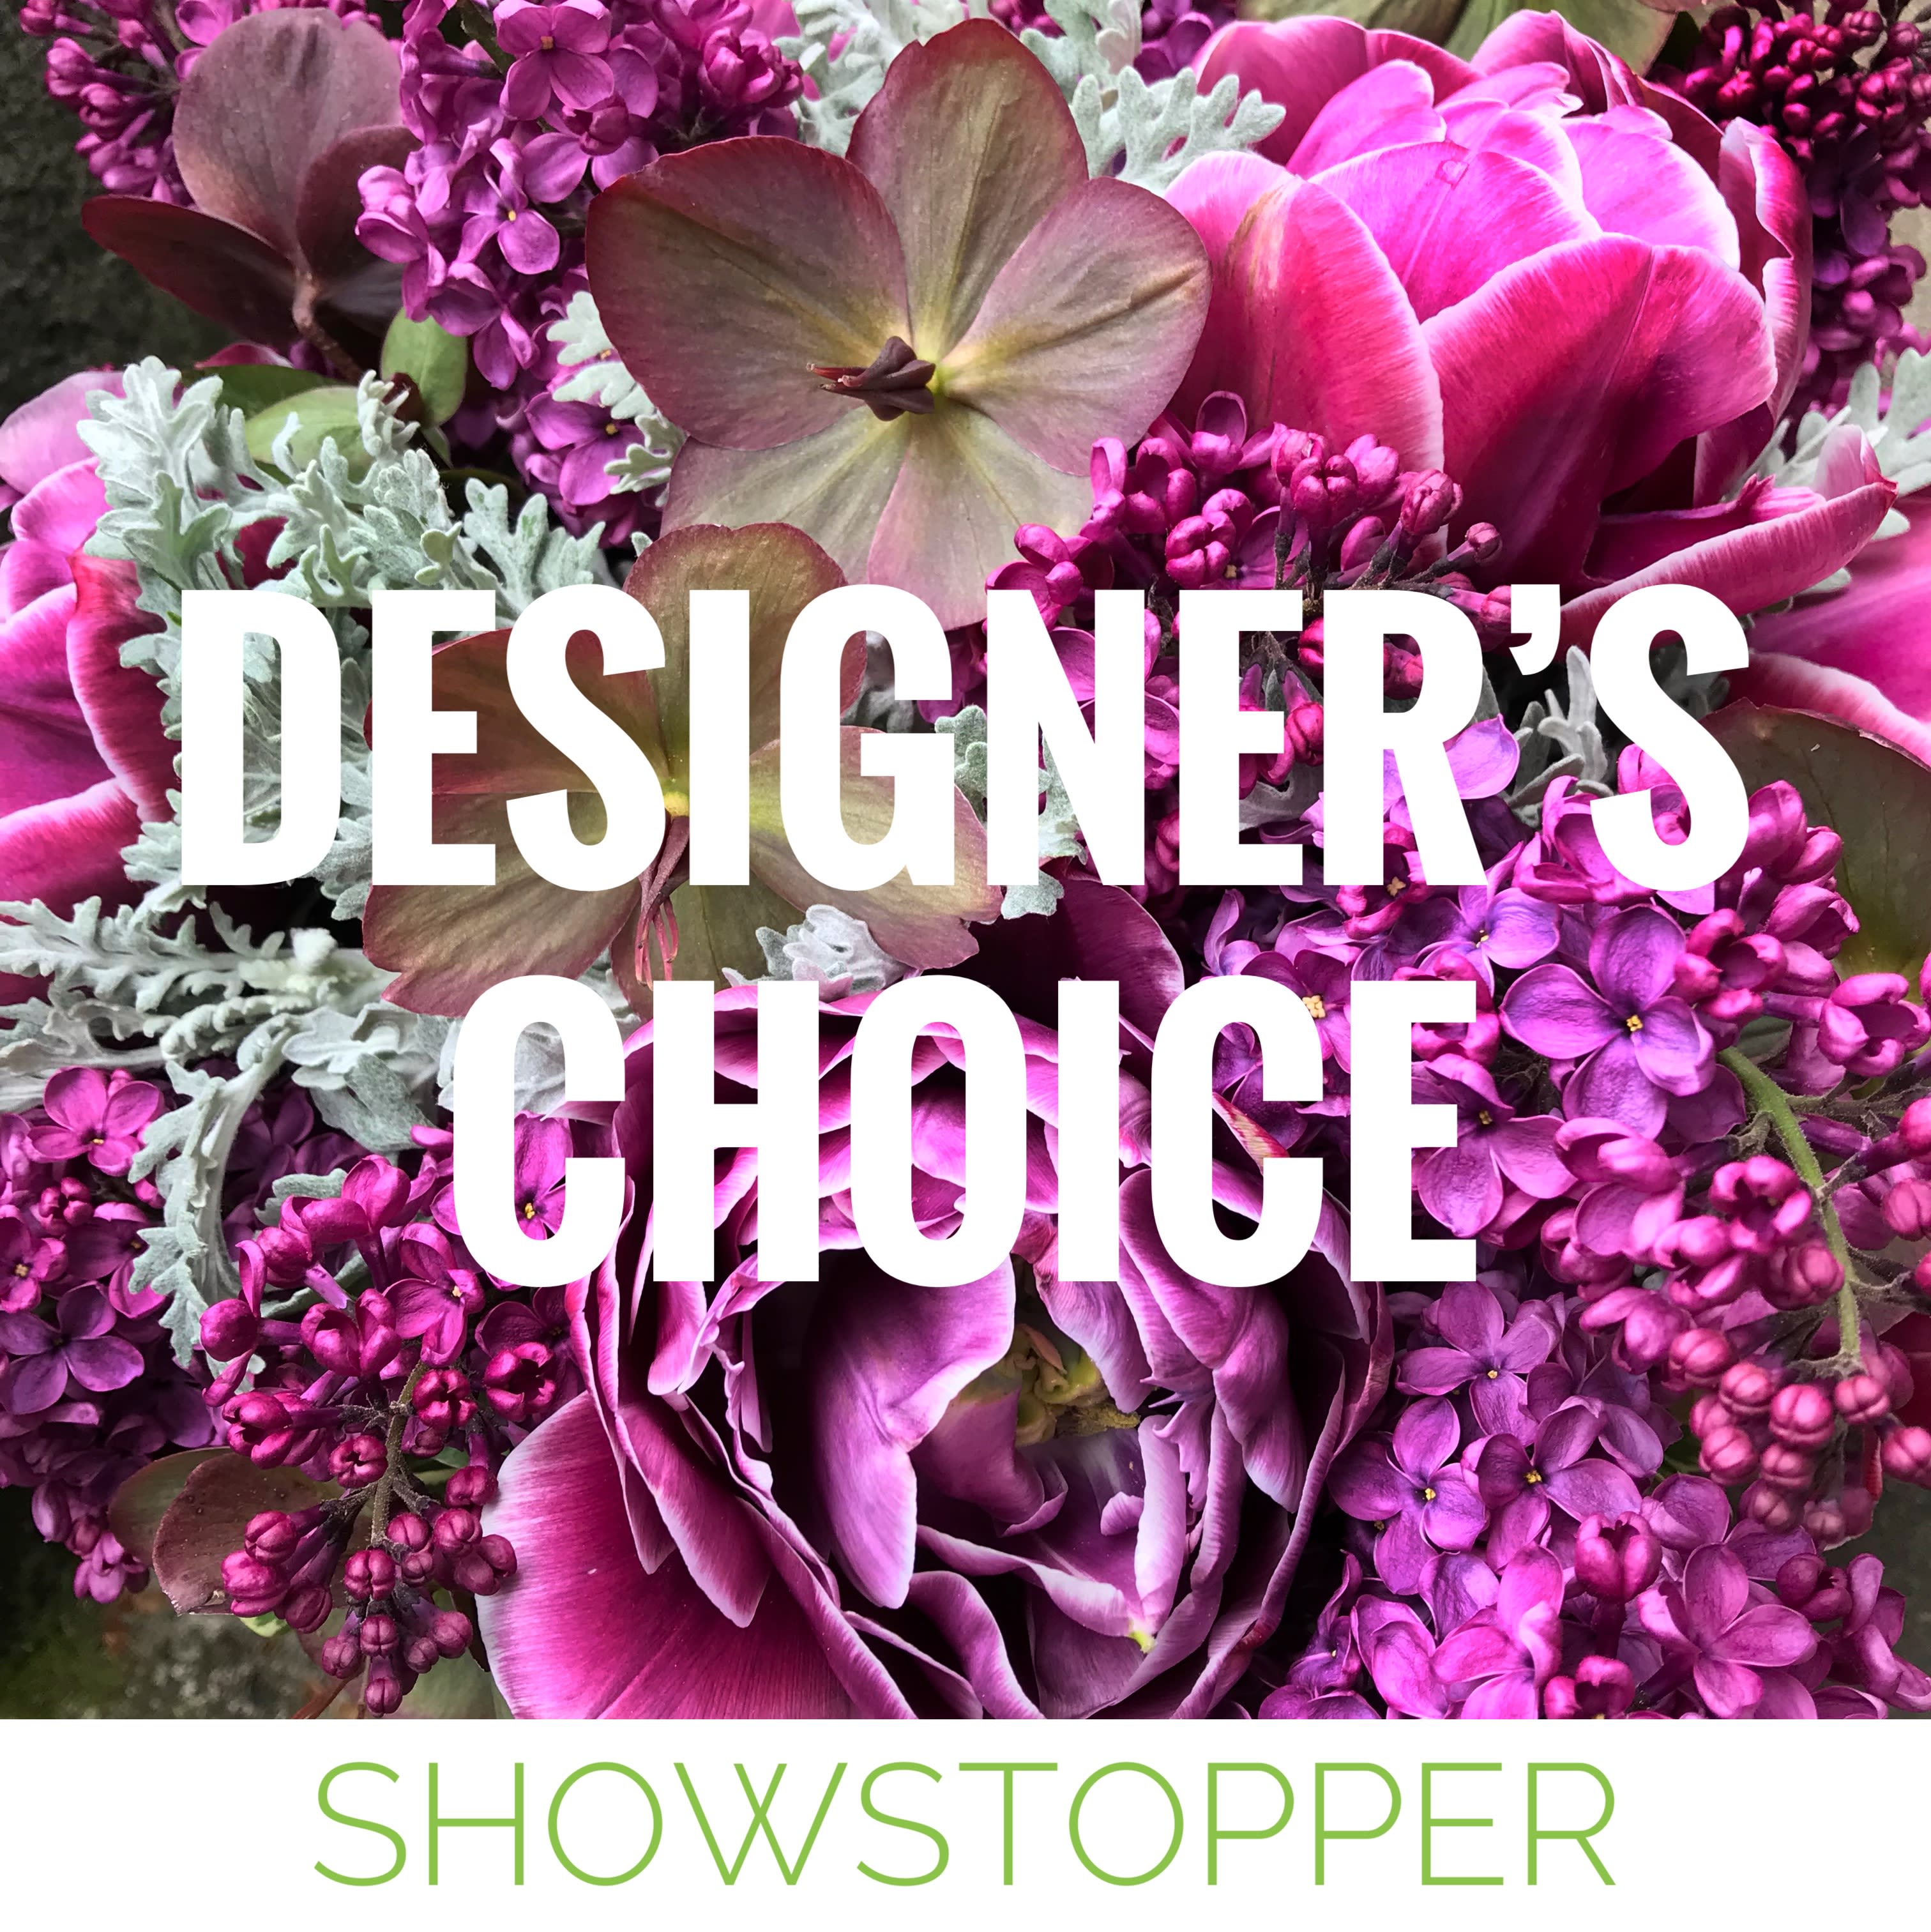 Showstopping Arrangement - A beautiful and dramatic floral arrangement guaranteed to steal the show! A designer's choice arrangement consists of seasonal blooms arranged to value with the occasion in mind. Every week we work with a new our color palette so we have a constantly changing variety of flowers to work with. The freshest seasonal blooms will be used to create your arrangement. If you have special requests, please call us or use our custom arrangements order form.  We are happy to accommodate you.  Photos are examples of past floral arrangements that we have done. Actual arrangements will vary with the season, our weekly color palette and the flowers that we have on hand.